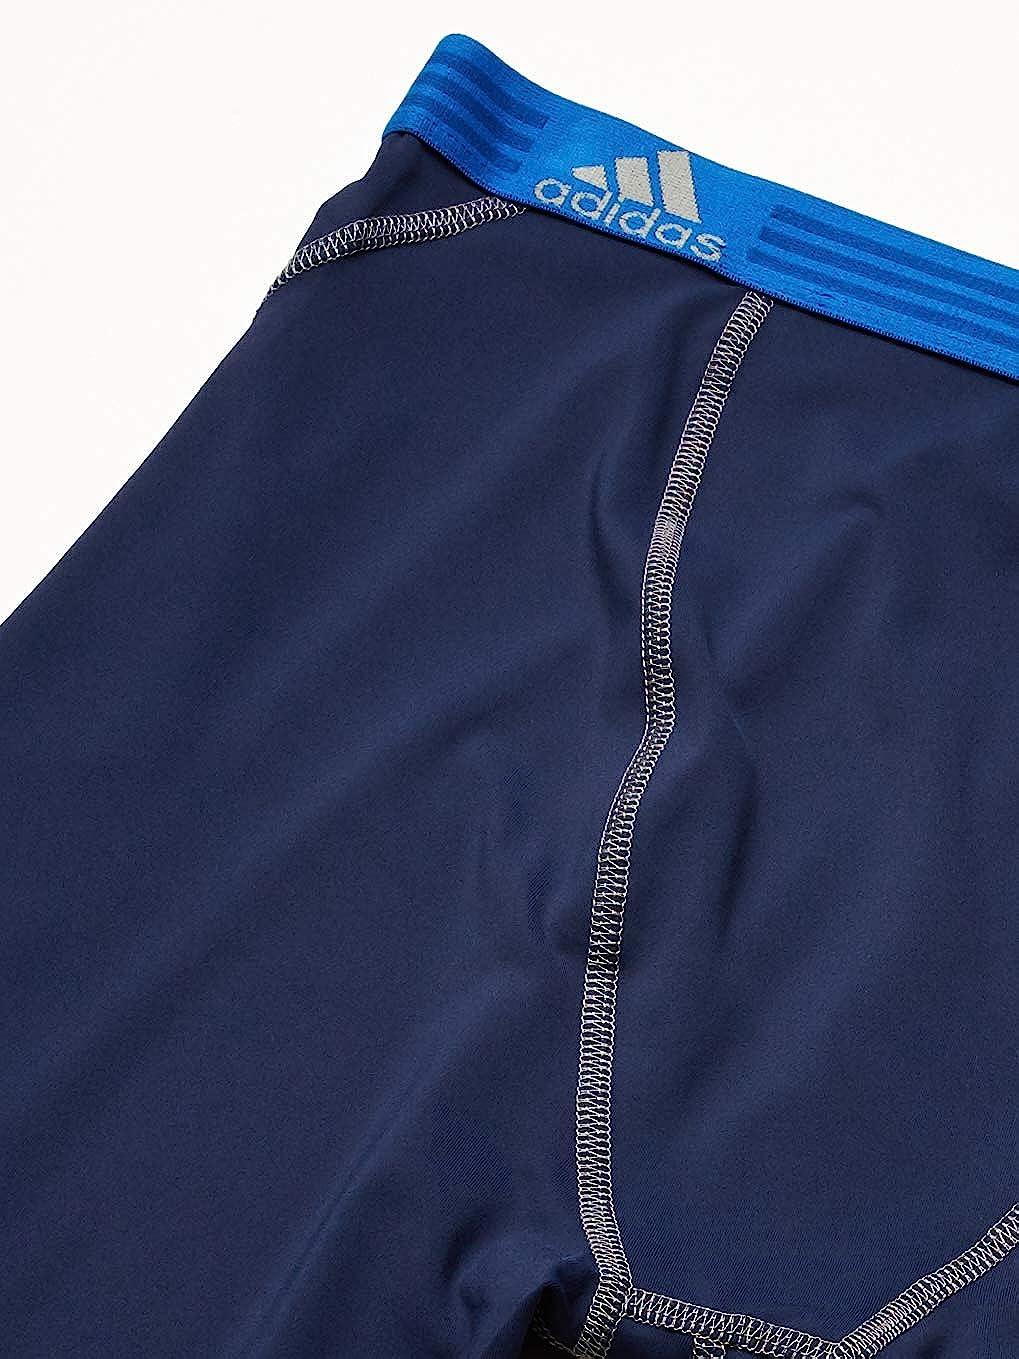  adidas Men's Sport Performance Graphic 2-Pack Trunk